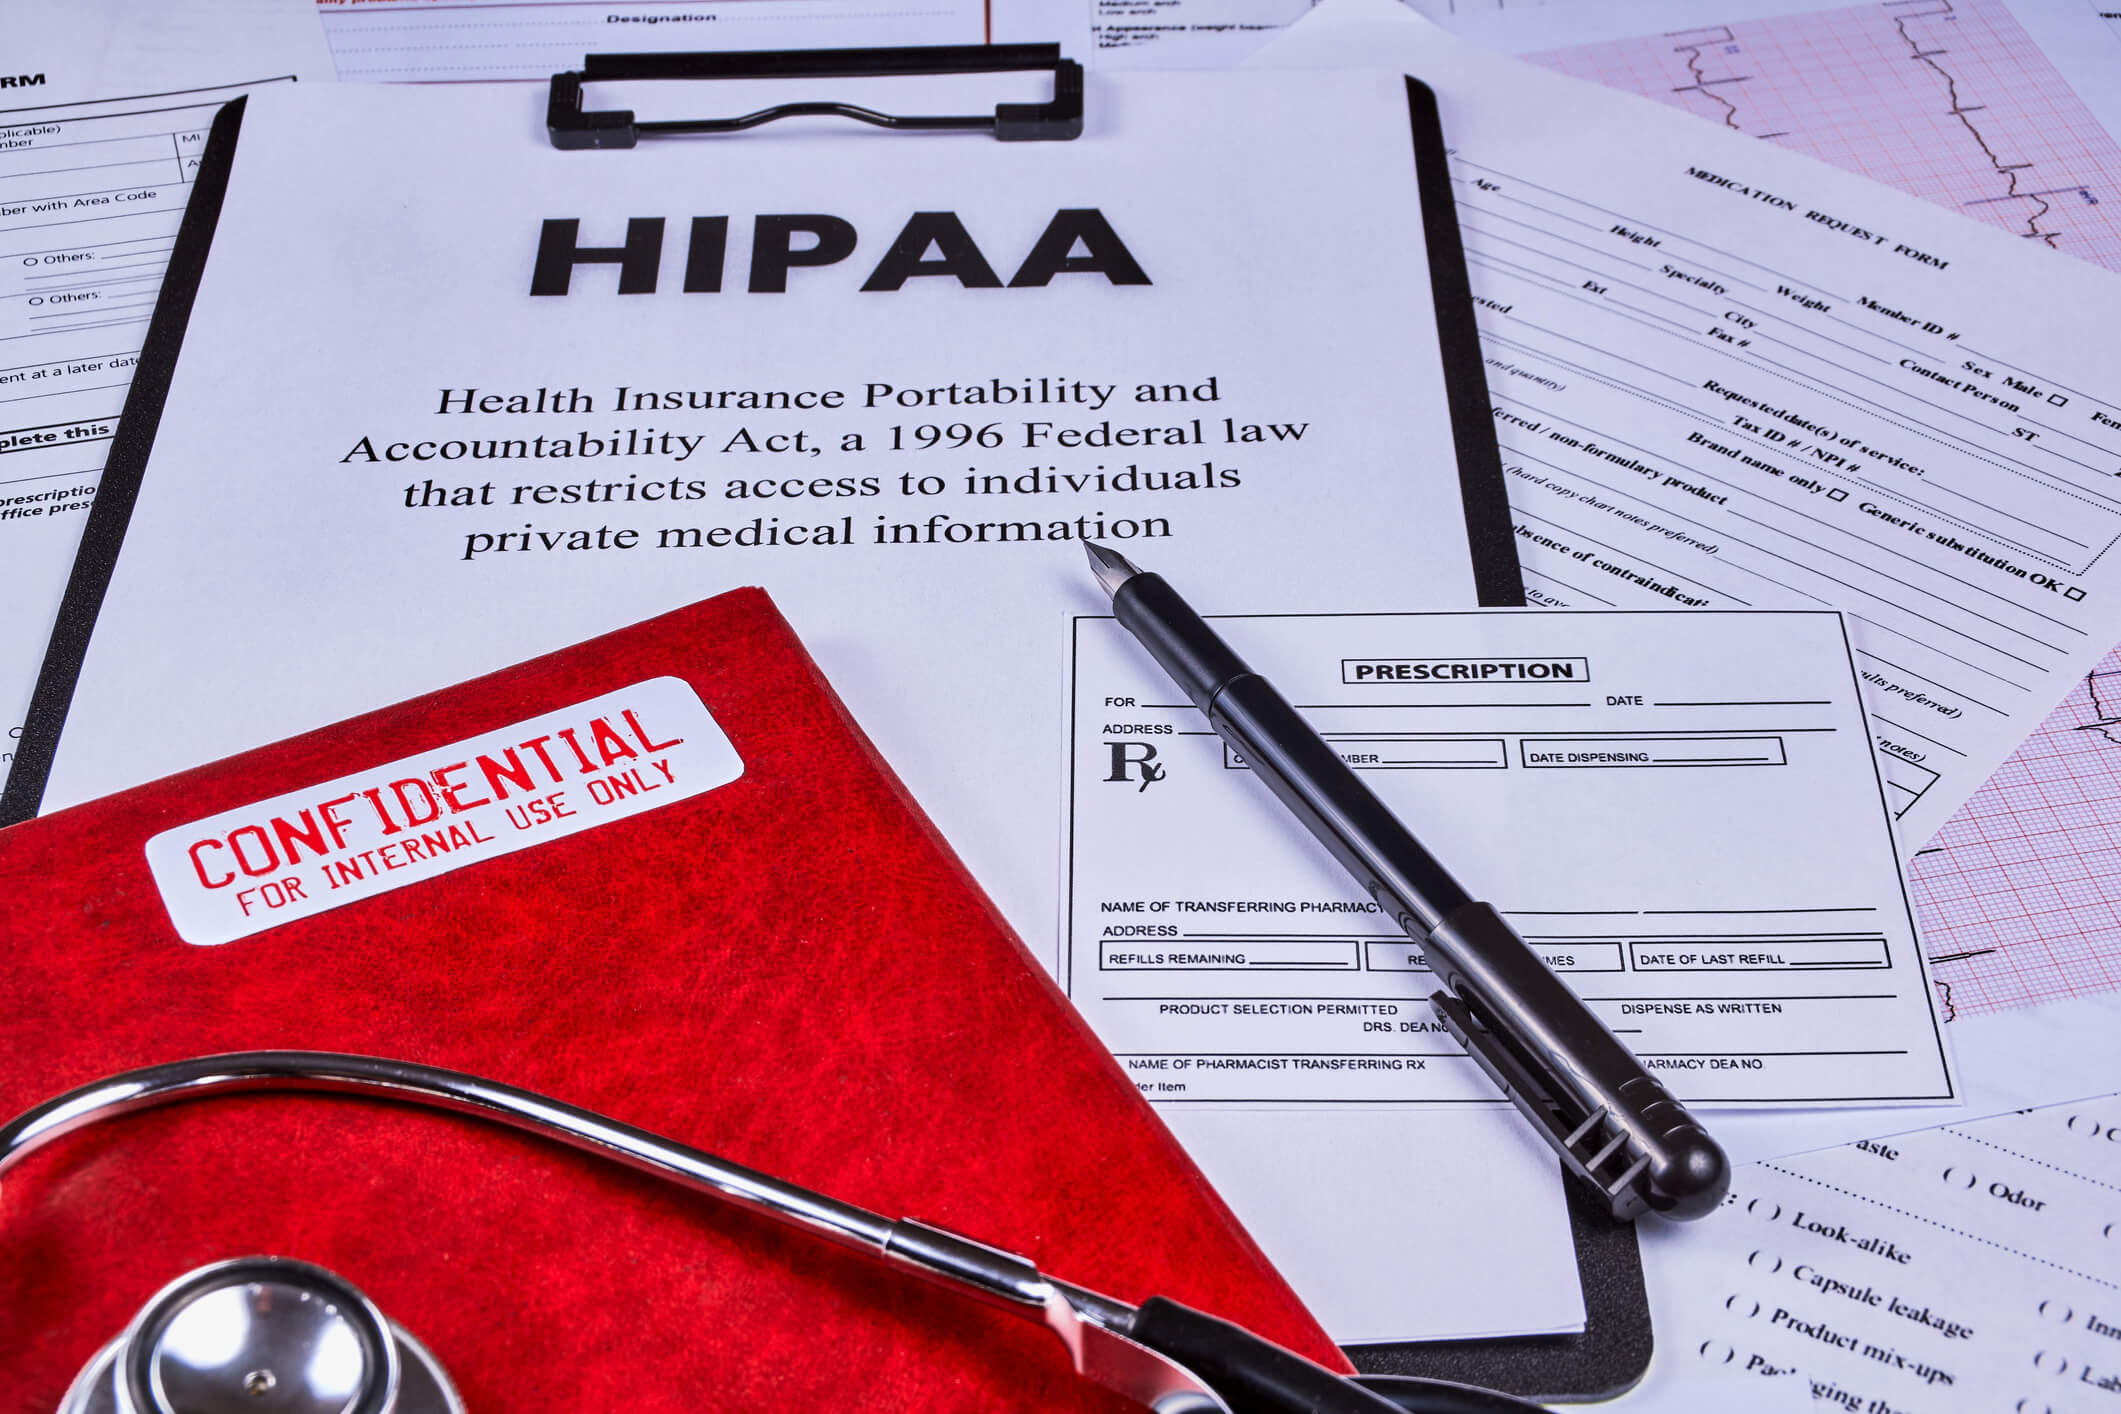 HIPAA Compliance - Complete Controller